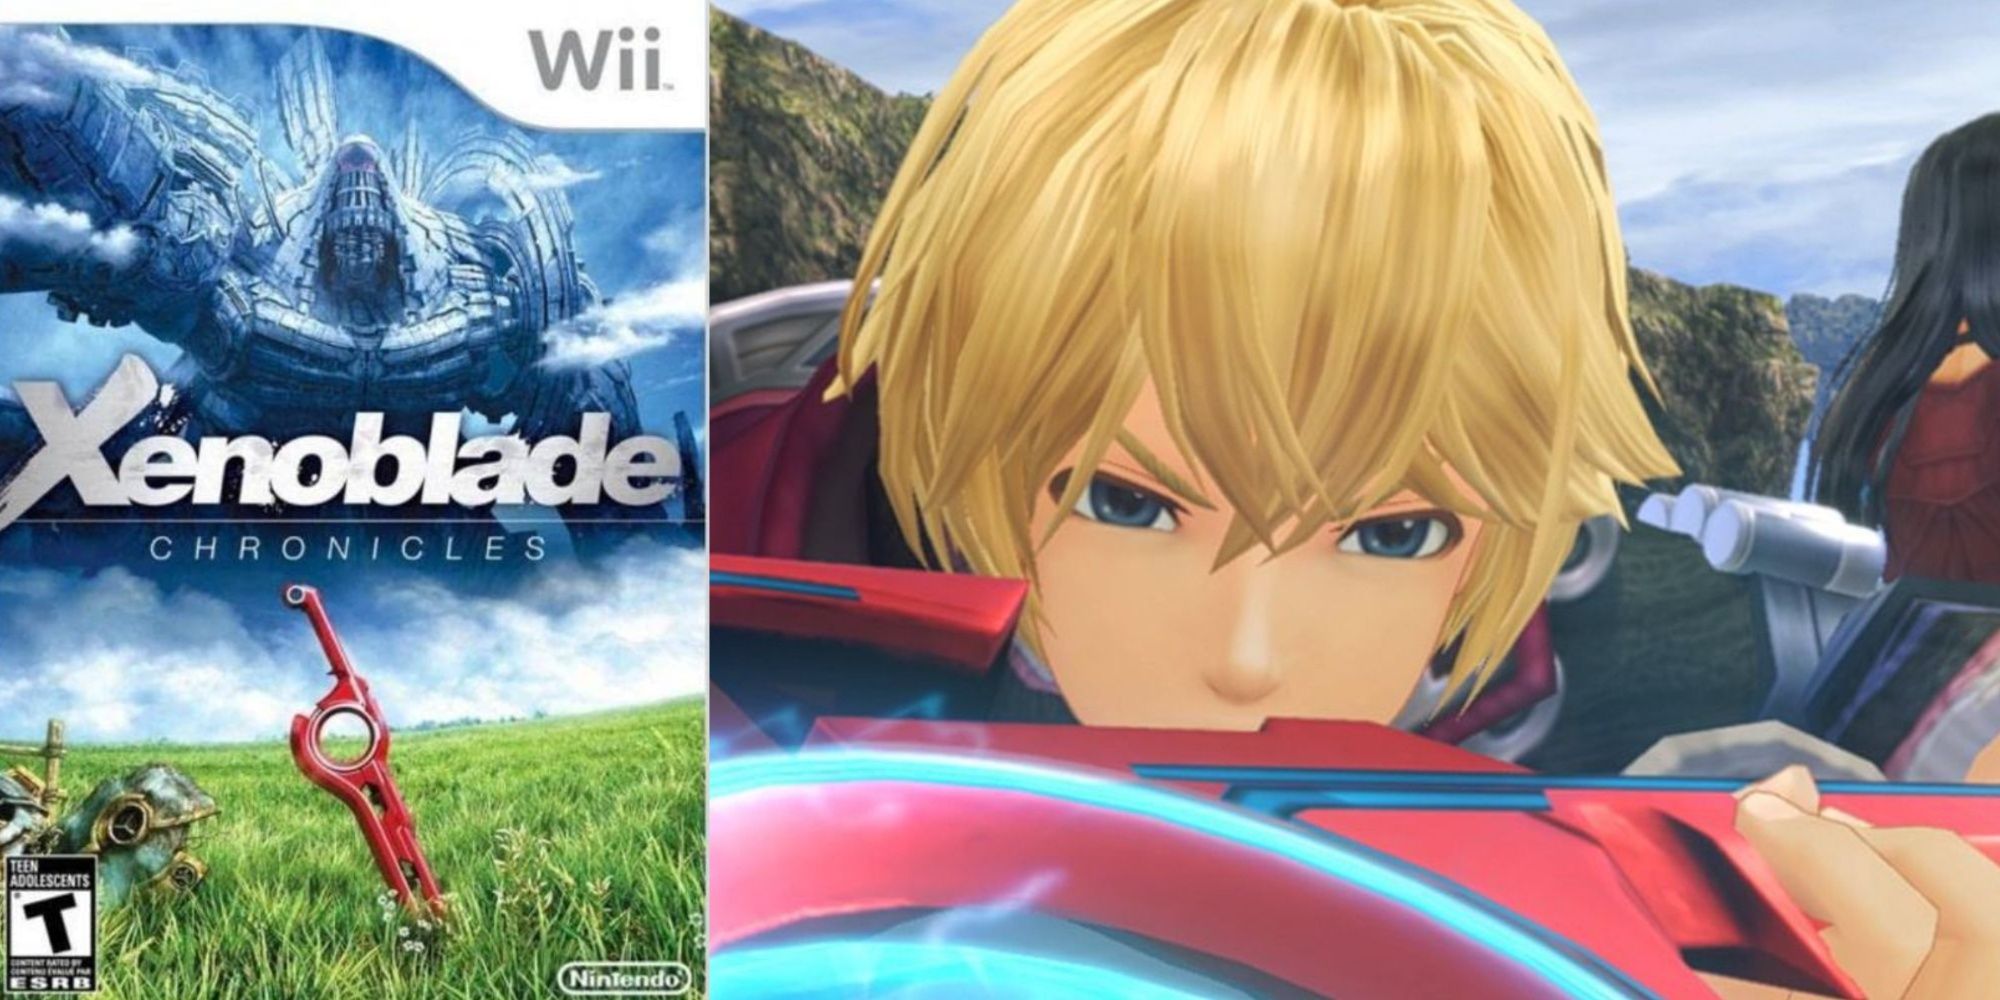 A split image of the cover artwork for Xenoblade Chronicles on Wii and a close-up of the main protagonist from the game.